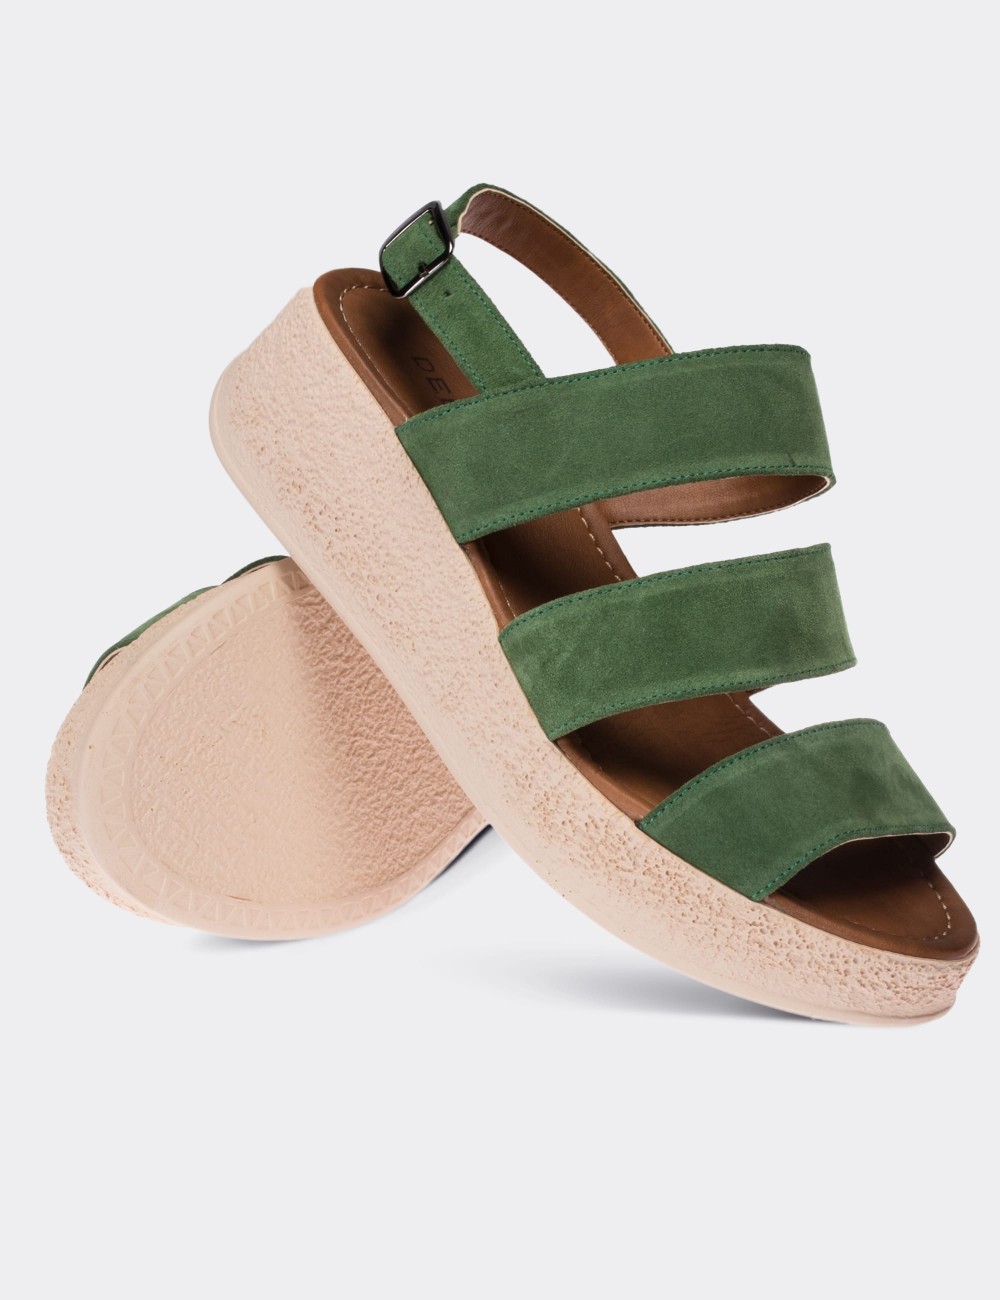 Green Suede Leather  Sandals - 02123ZYSLP01